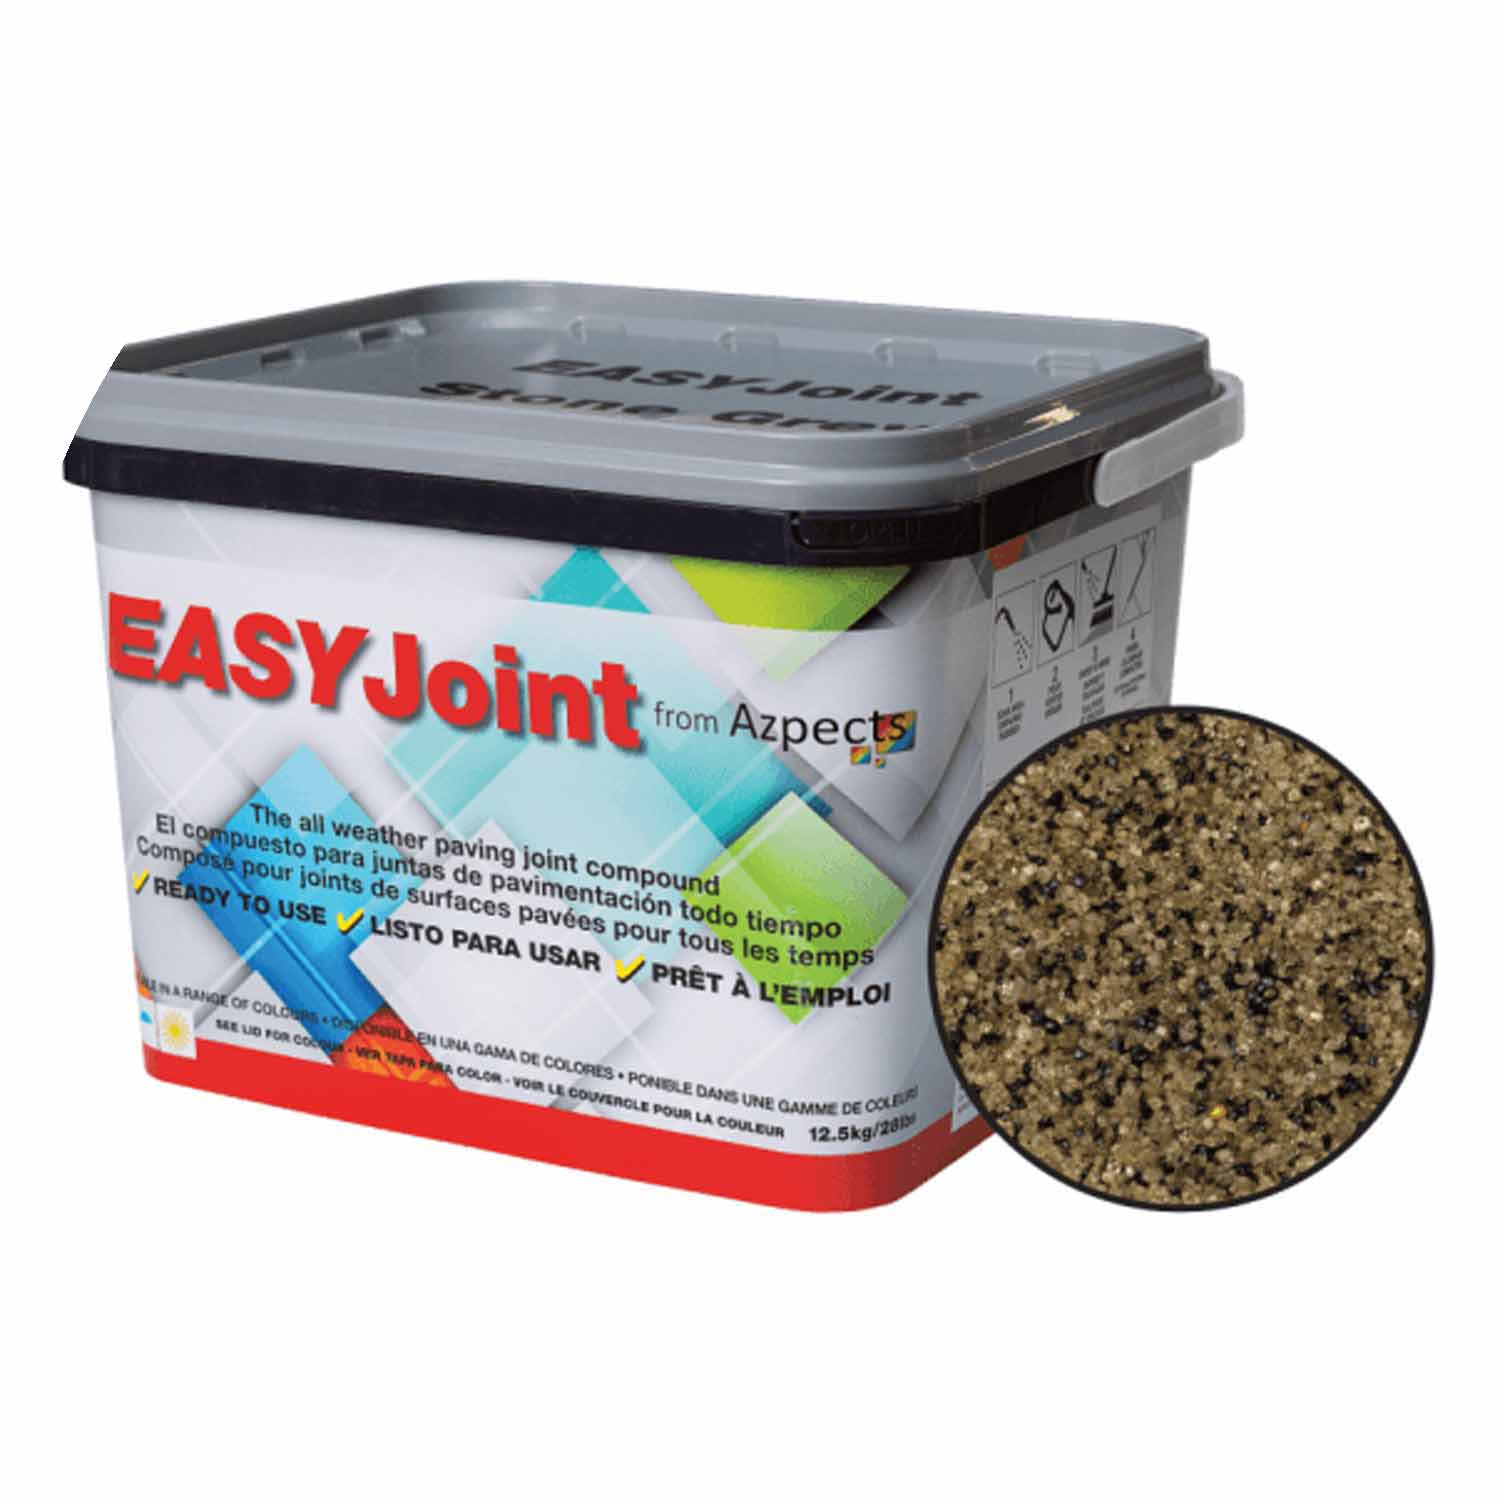 Easyjoint Jointing Compound 12.5kg